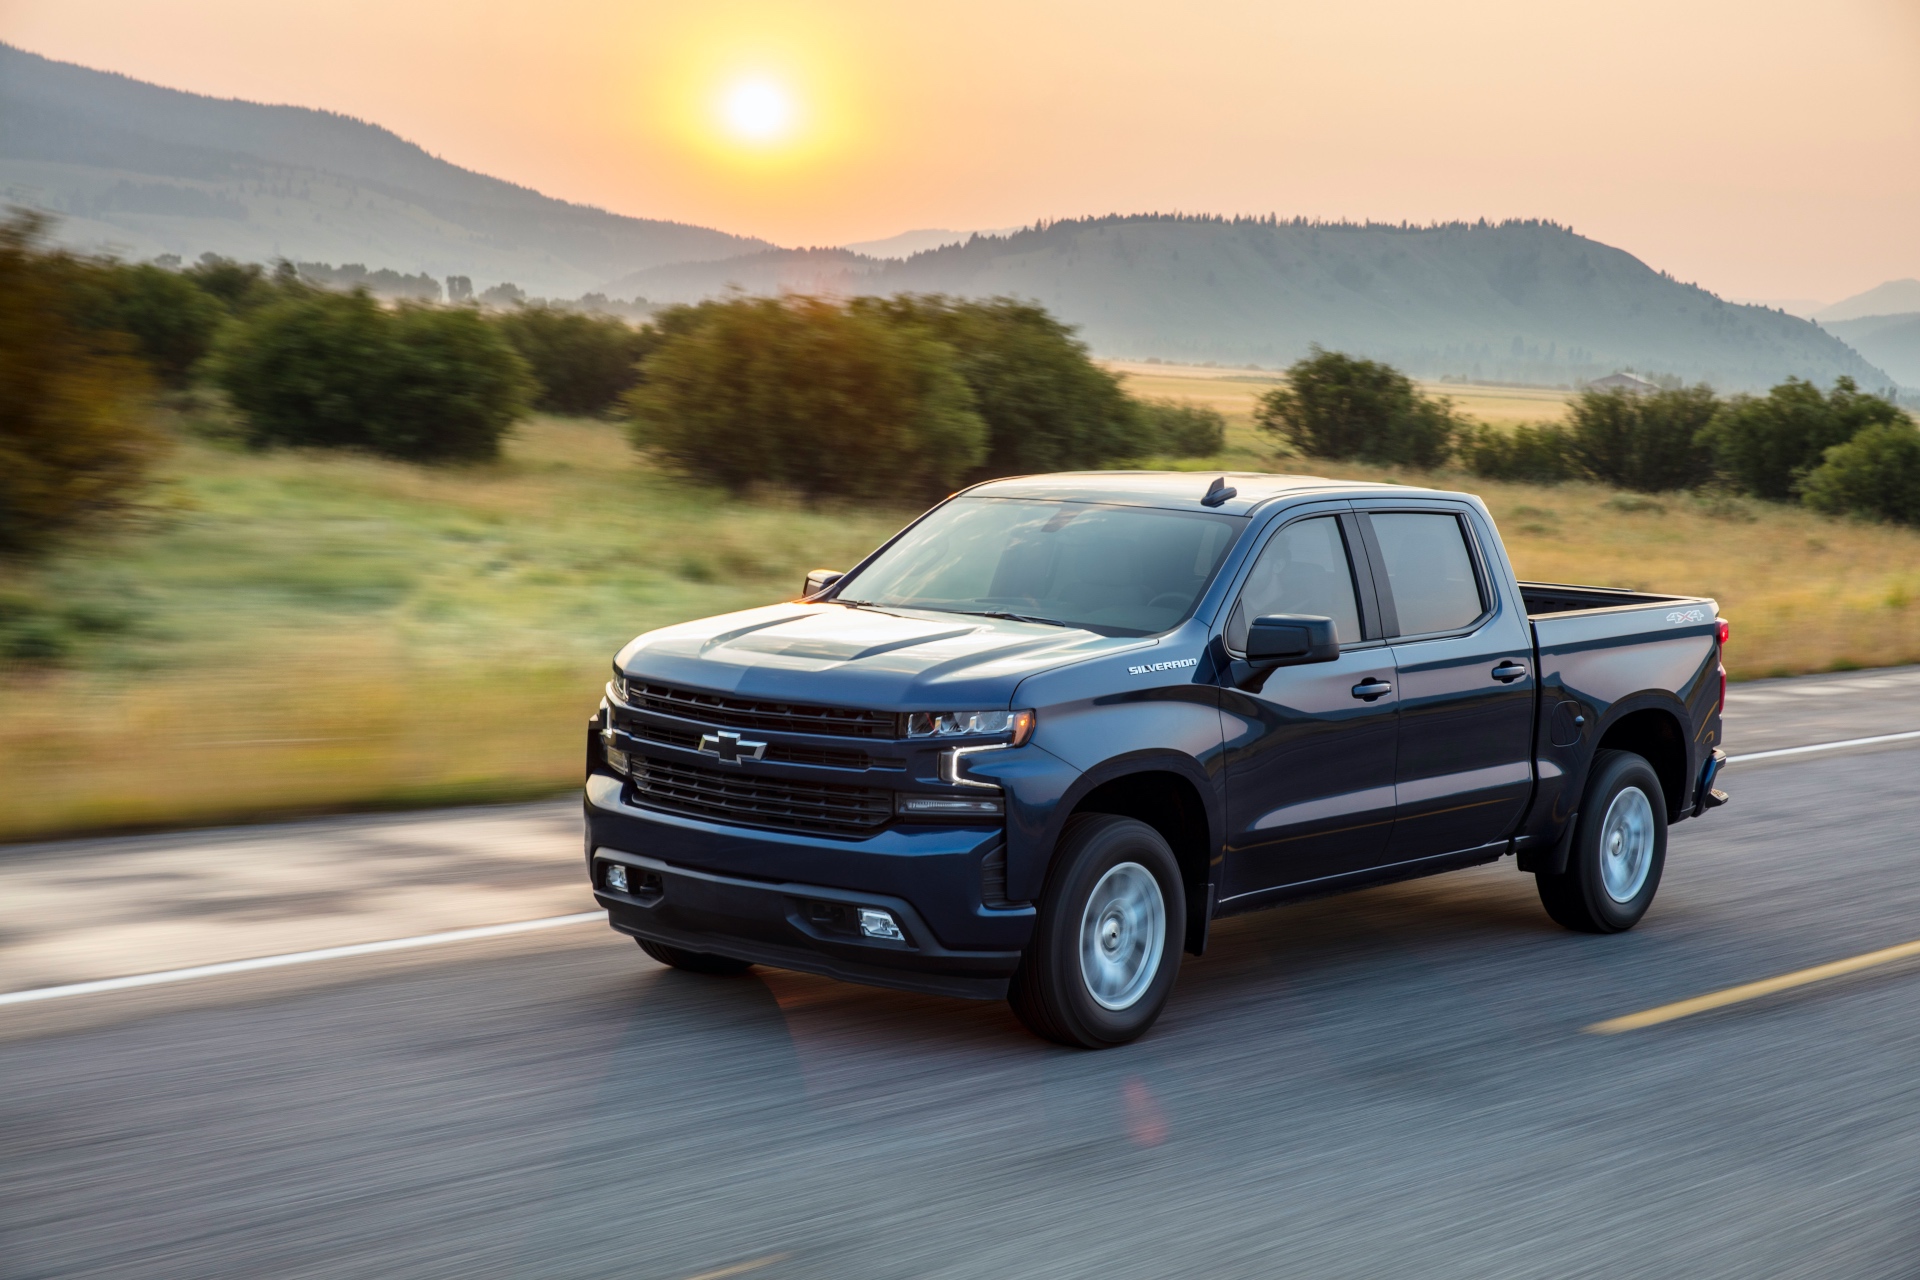 GM To Open Oshawa Plant Ahead of Schedule to Build Sierra and Silverado